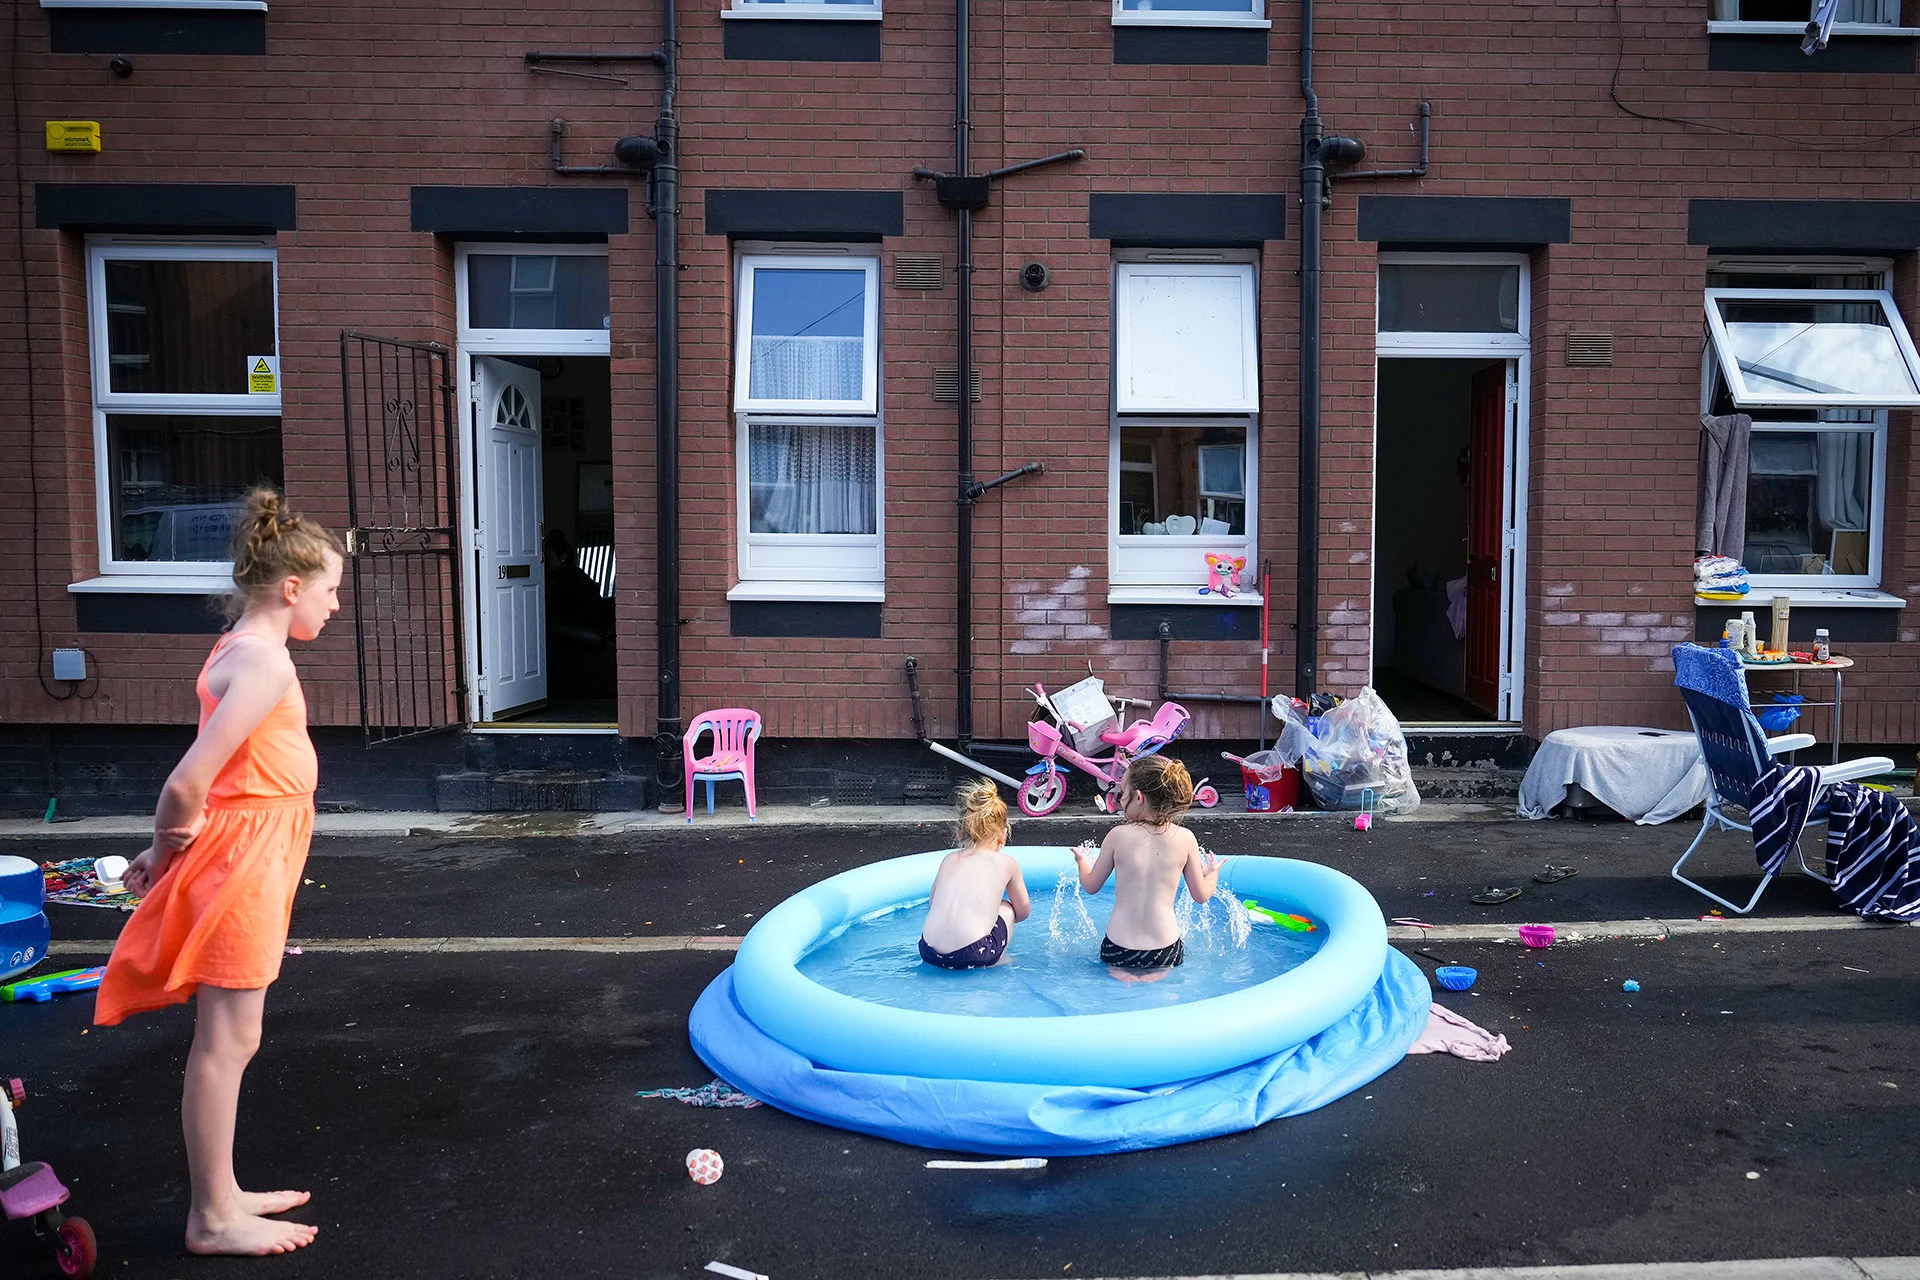 A family enjoys a barbecue and cool off in a paddling pool outside their home on July 19, 2022 in Leeds, United Kingdom. Temperatures exceeded 40 C in parts of England this day after the Met Office issued its first red extreme heat warning. Record-breaking temperatures were reached across the UK. (Christopher Furlong/ Getty Images)